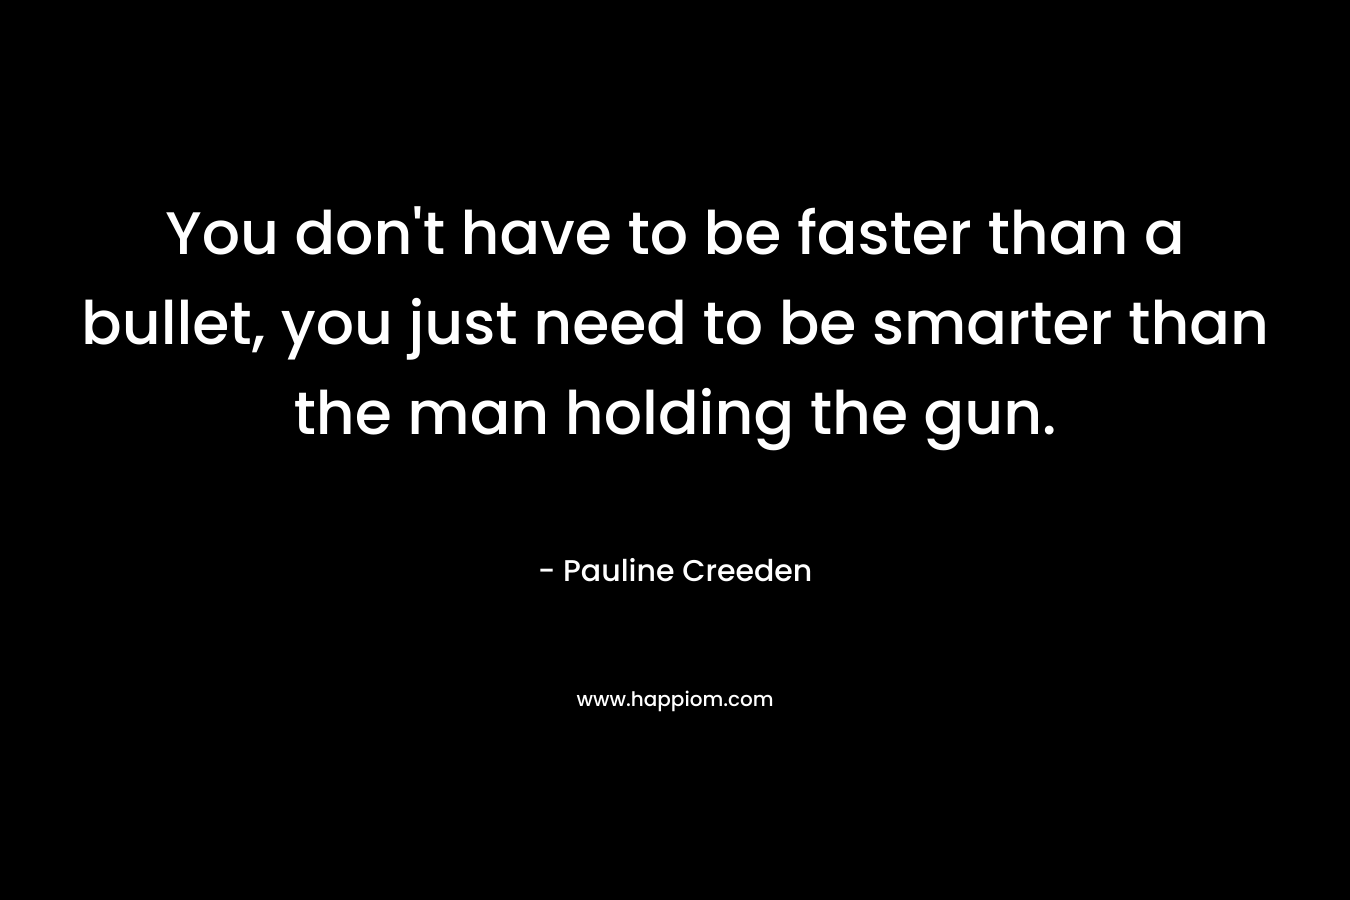 You don’t have to be faster than a bullet, you just need to be smarter than the man holding the gun. – Pauline Creeden